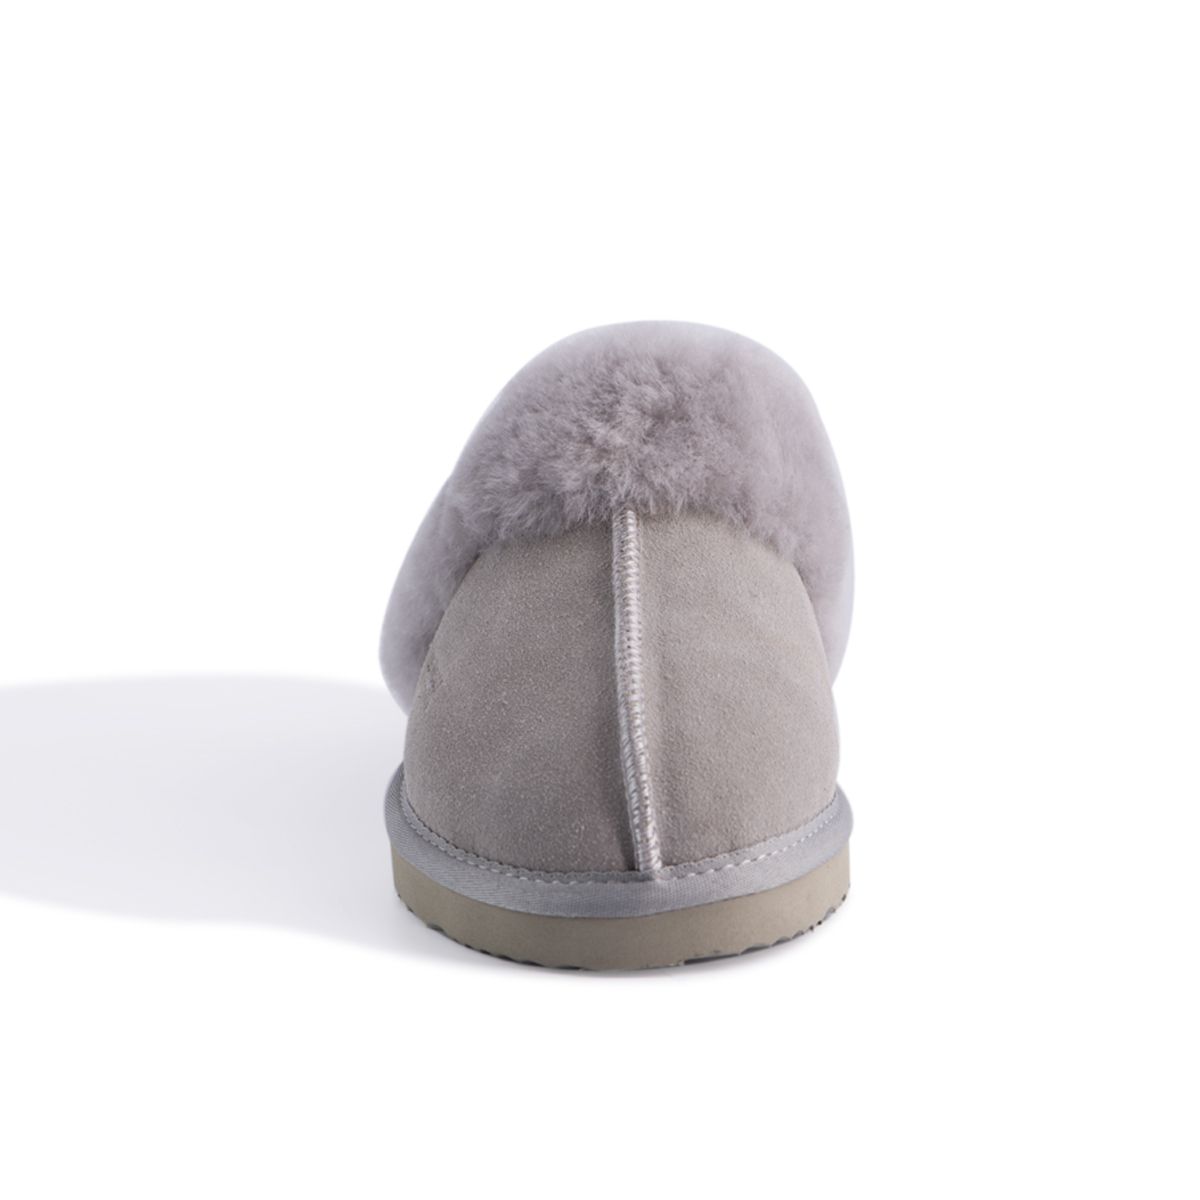 DETAILS





Cosy and snug, easy slip-on slipper

Soft premium genuine Australian Sheepskin wool lining
Full premium leather Suede upper with Australian sheepskin insole
Sustainably sourced and eco-friendly processed
Unisex sheepskin slipper - can be worn day and night
Soft EVA outsole - extra cushioning and lightweight
Firm wool pelt for superior warmth
100% brand new and high quality, comes in a branded box, suitable for gift